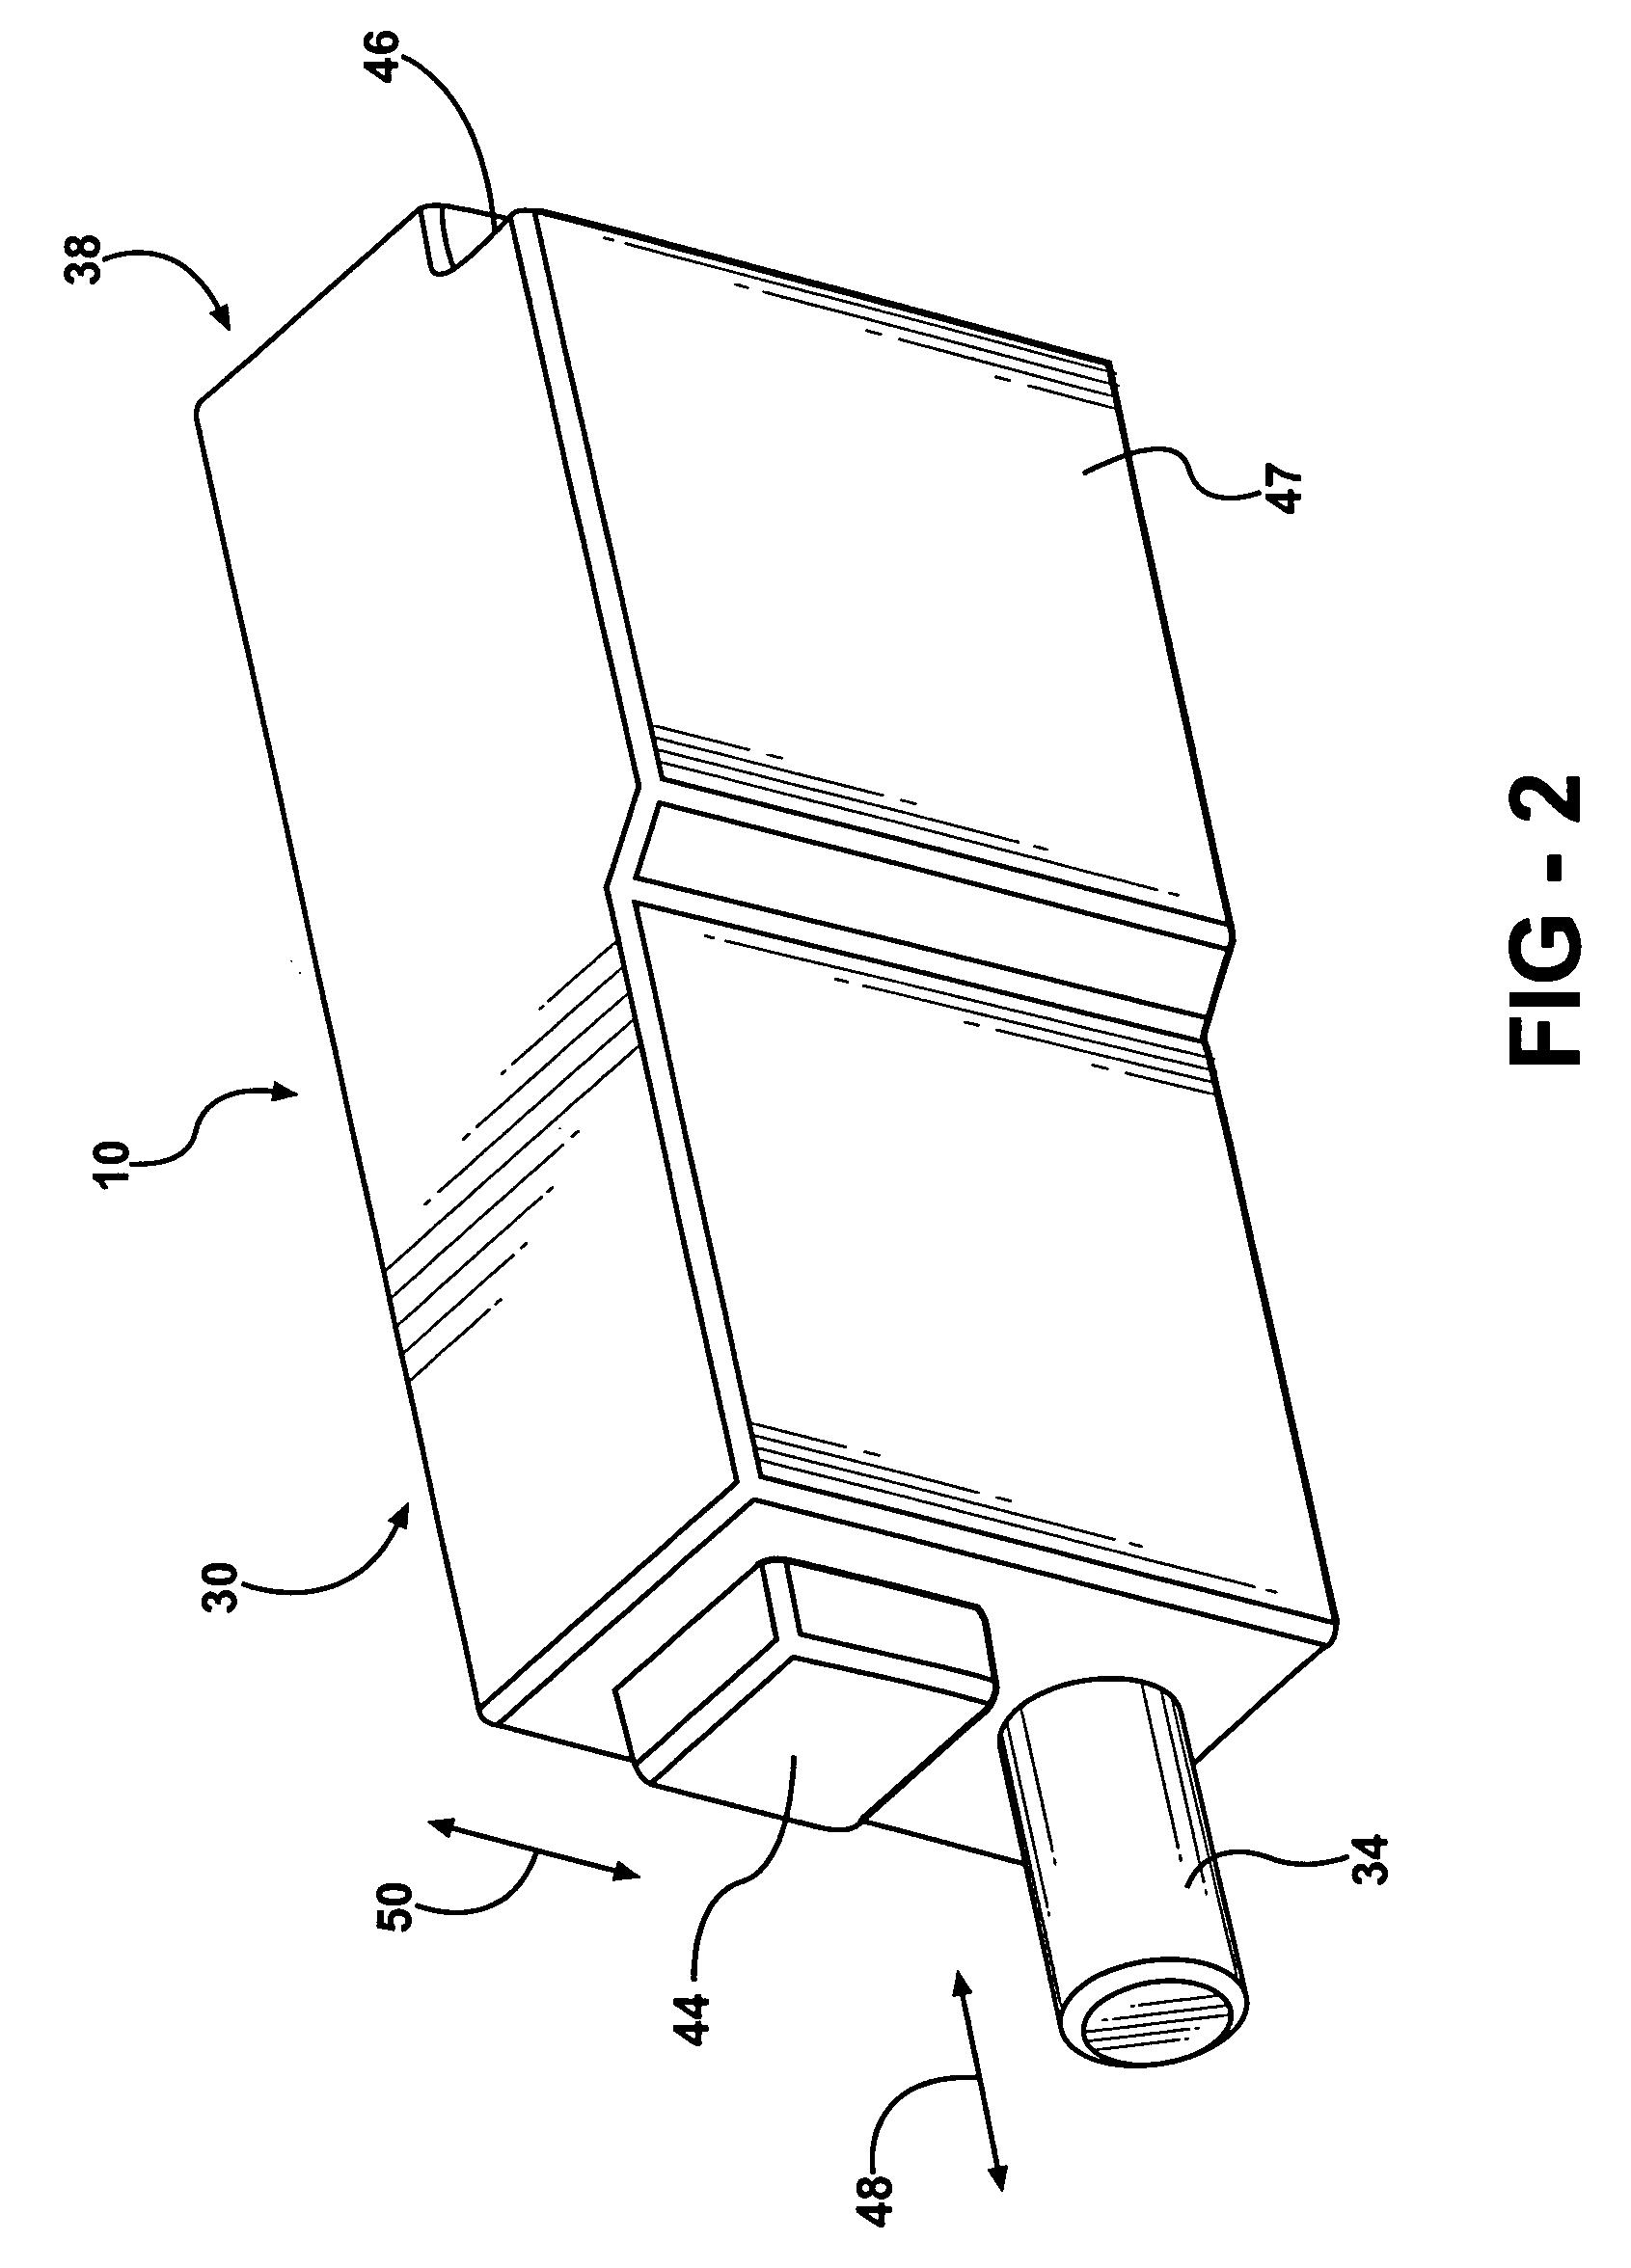 Portable lighting assembly for automotive vehicle